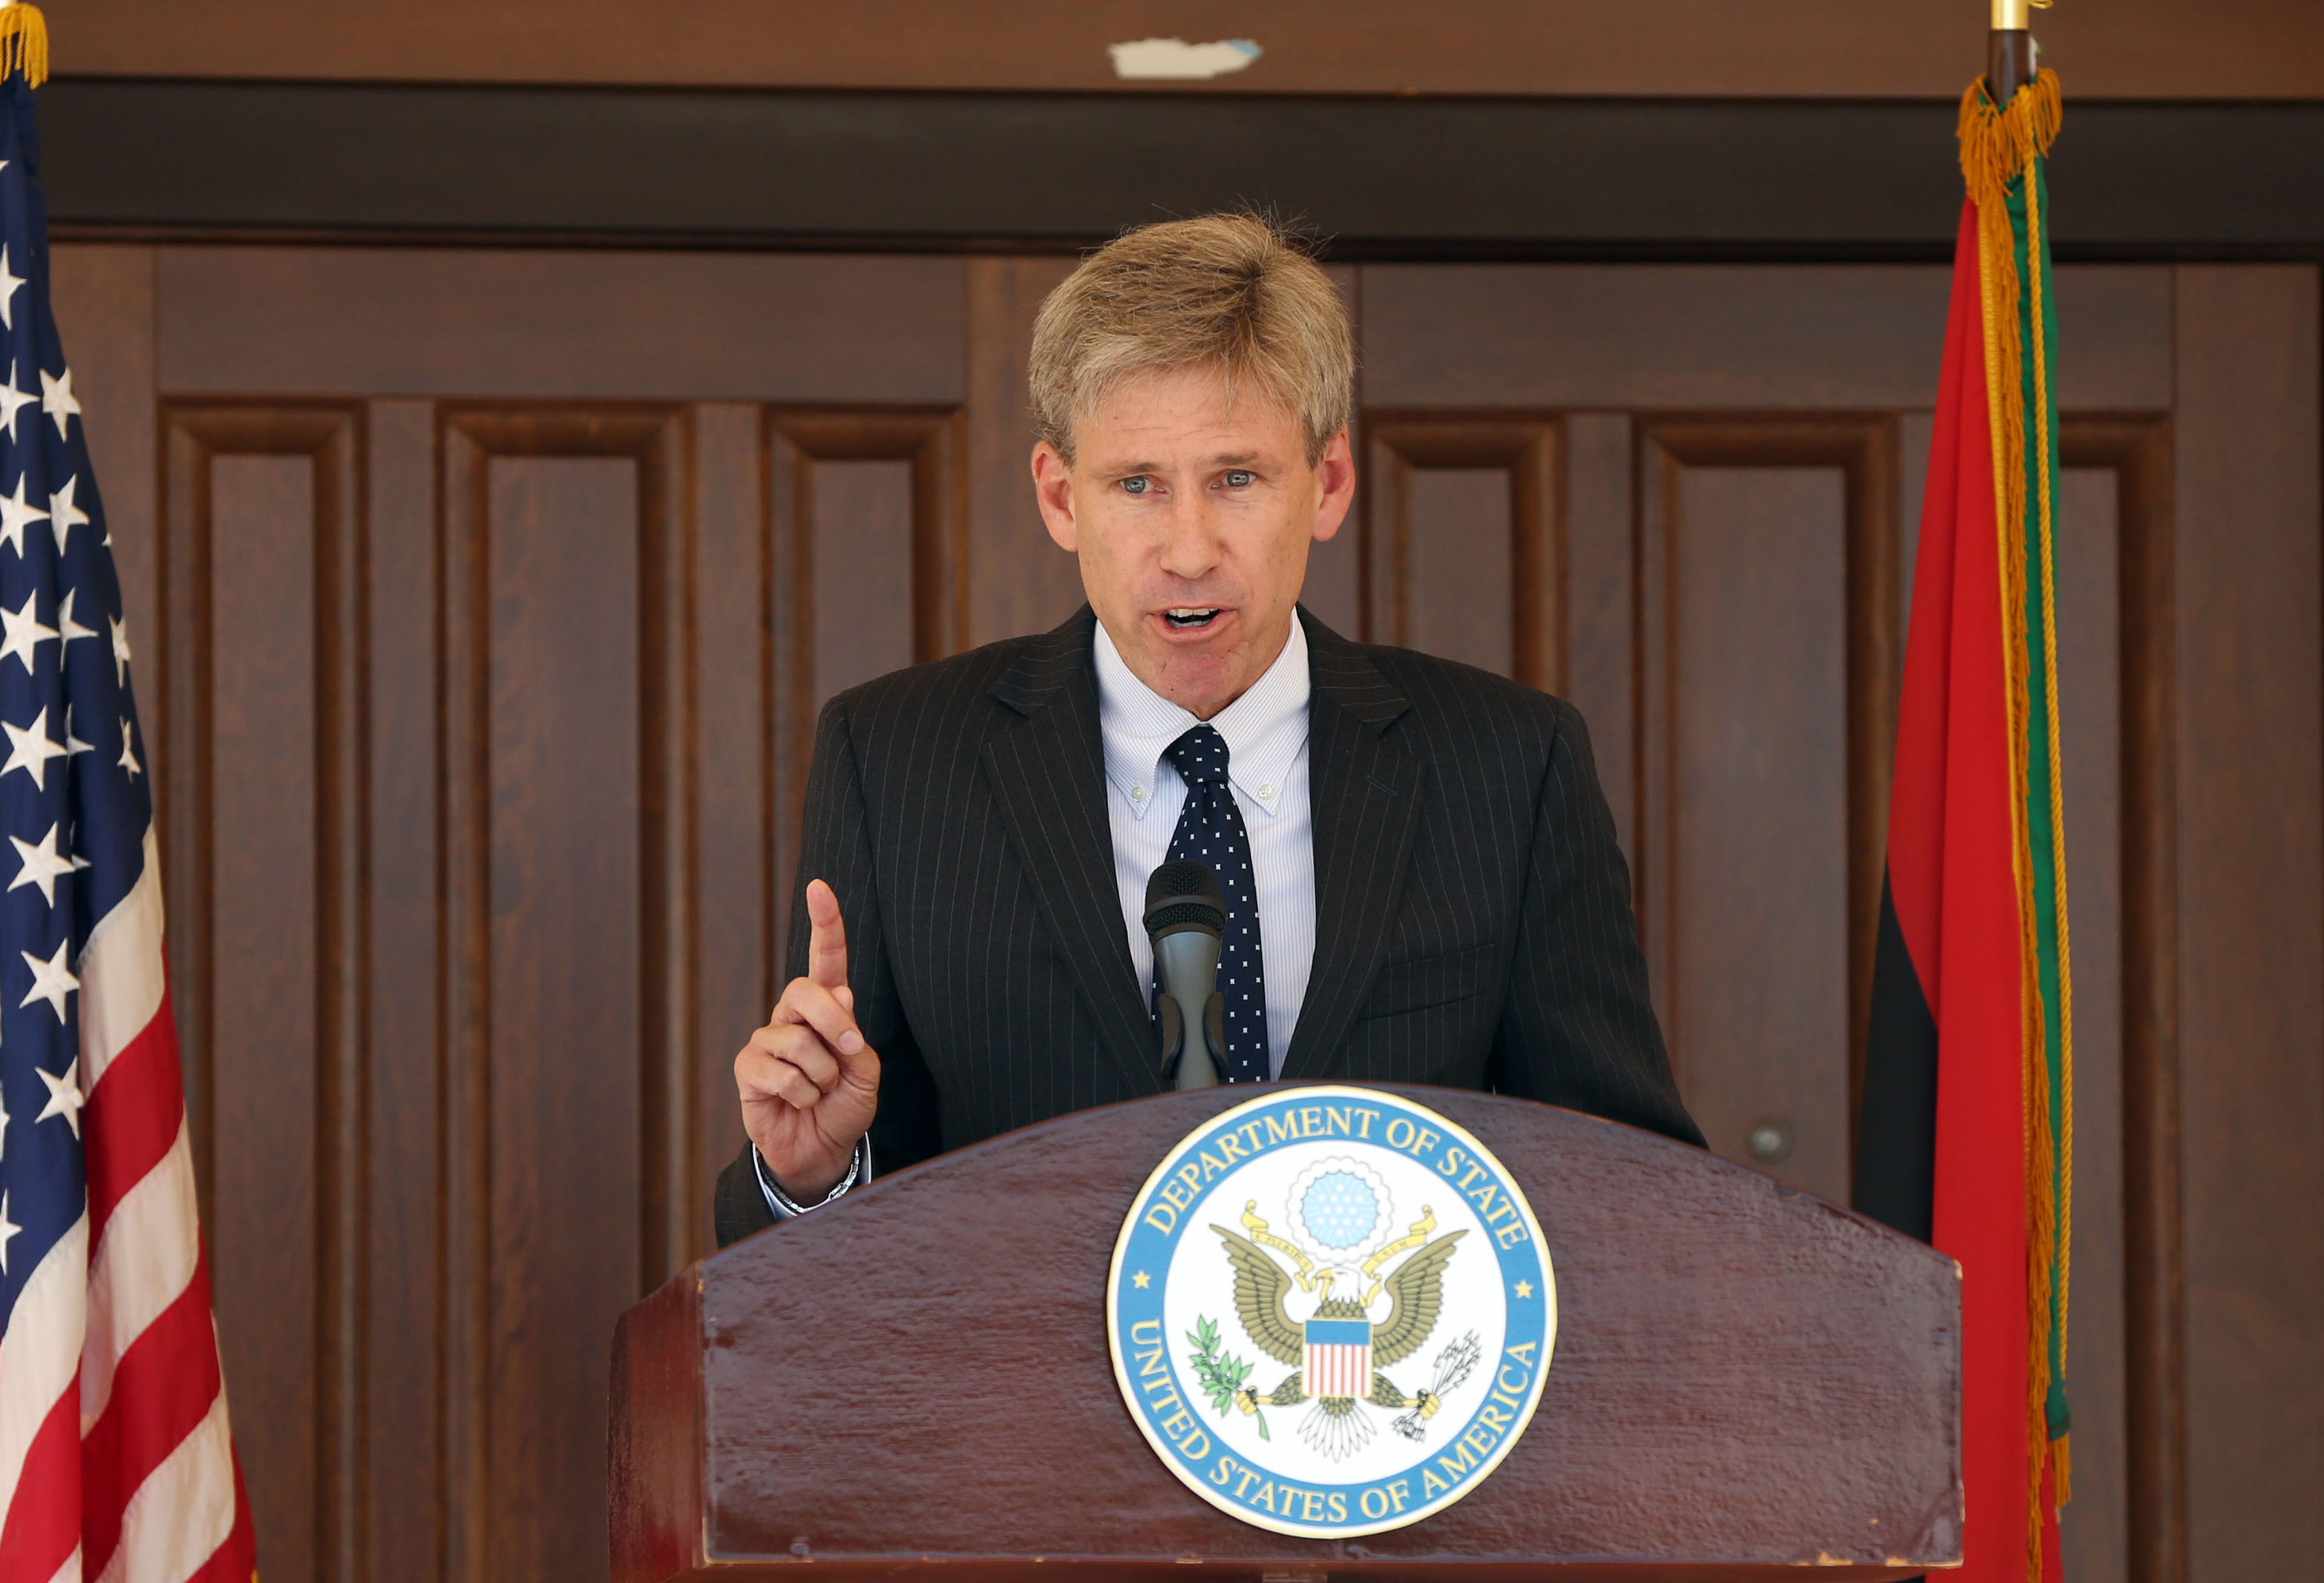 U.S. Ambassador to Libya Chris Stevens gives a speech on August 26, 2012 at the U.S. embassy in Tripoli. (Mahmud Turkia—AFP/Getty Images)